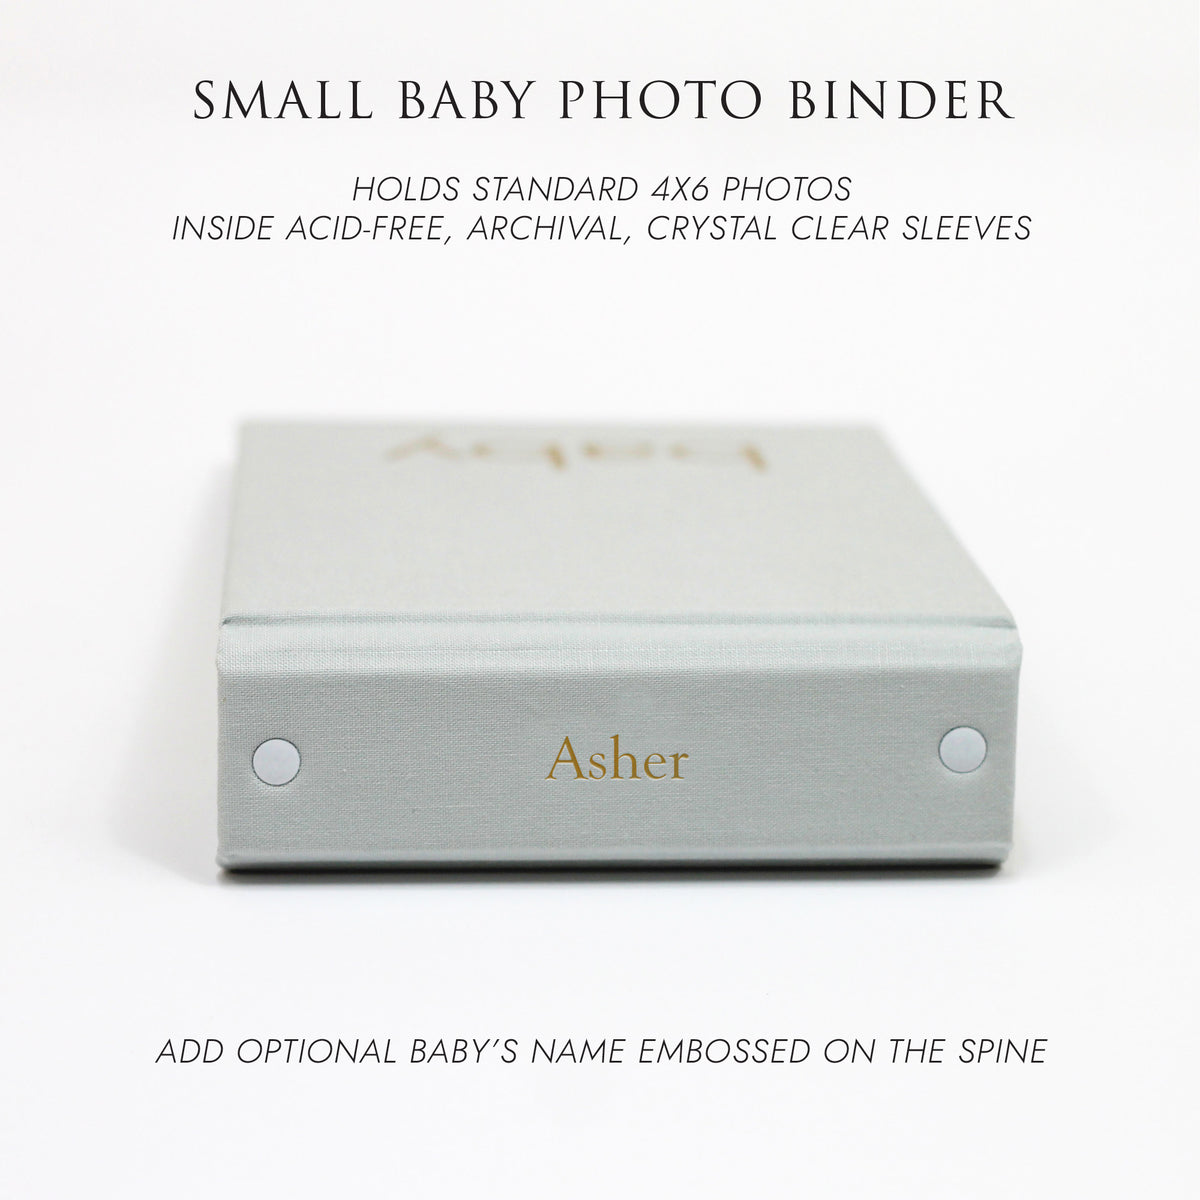 Small Baby Photo Binder | for 4x6 Photos | with Pastel Blue Cotton Cover | Includes BABY Title On Cover